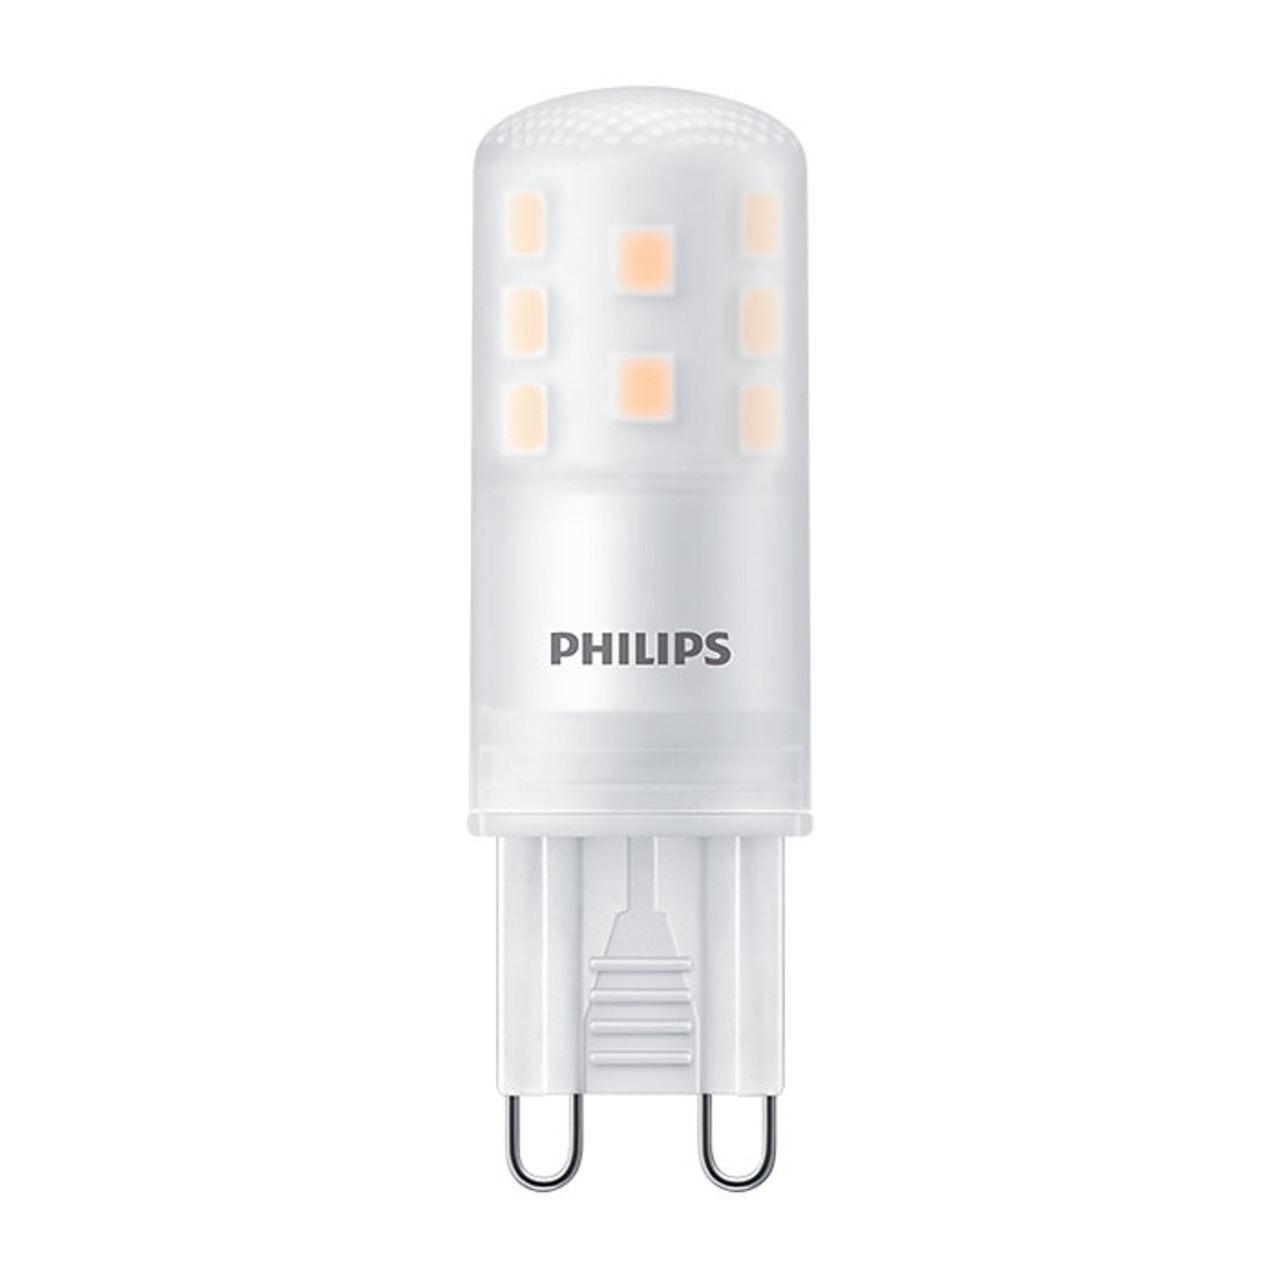 Philips 2-6-W-G9-LED-Lampe CorePro LEDcapsule- 300 lm- dimmbar- warmweiss unter Beleuchtung